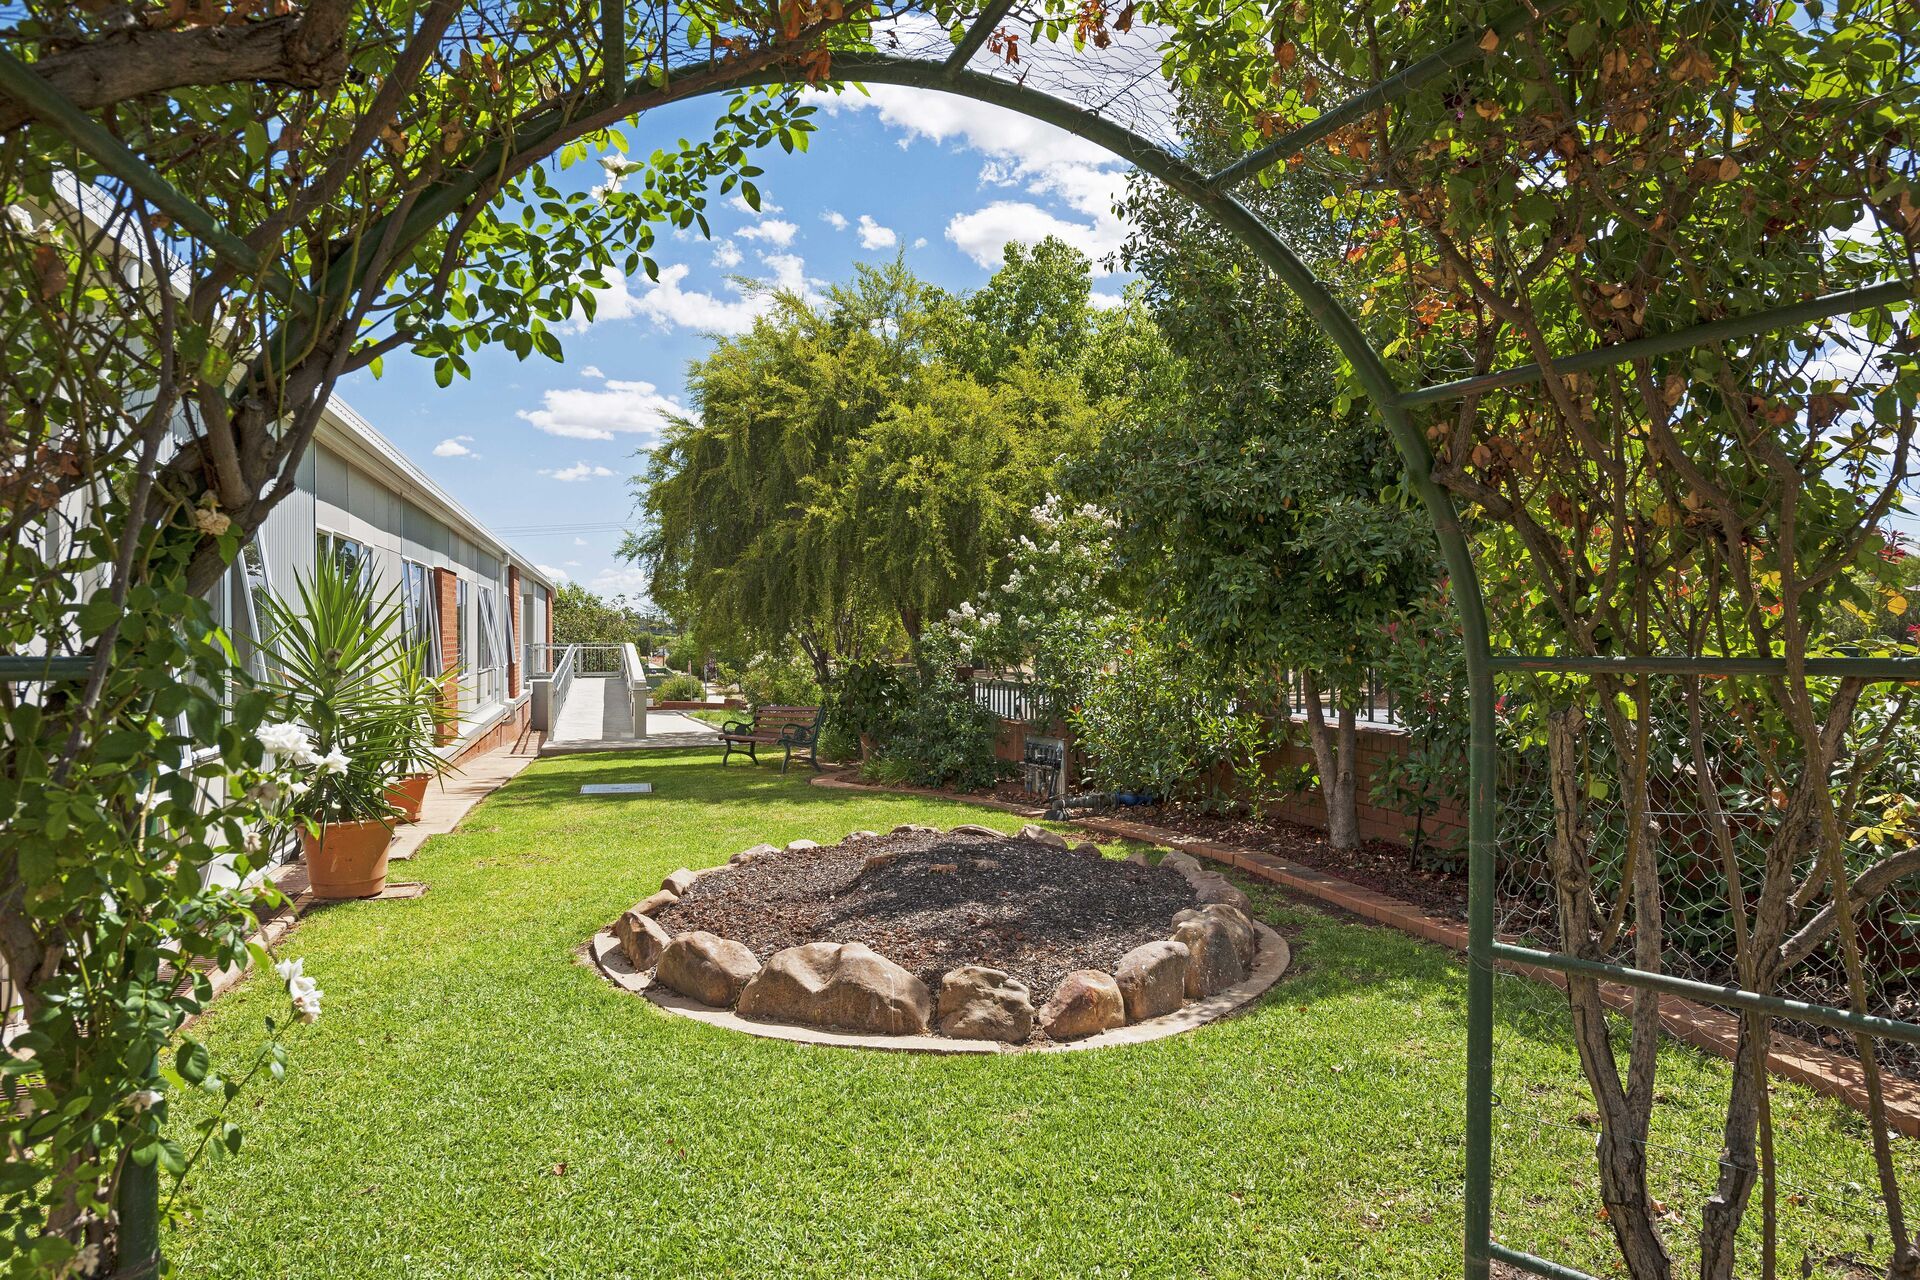 beautiful gardens with archway for nursing home residents to explore and enjoy at baptistcare niola centre aged care home in parkes nsw